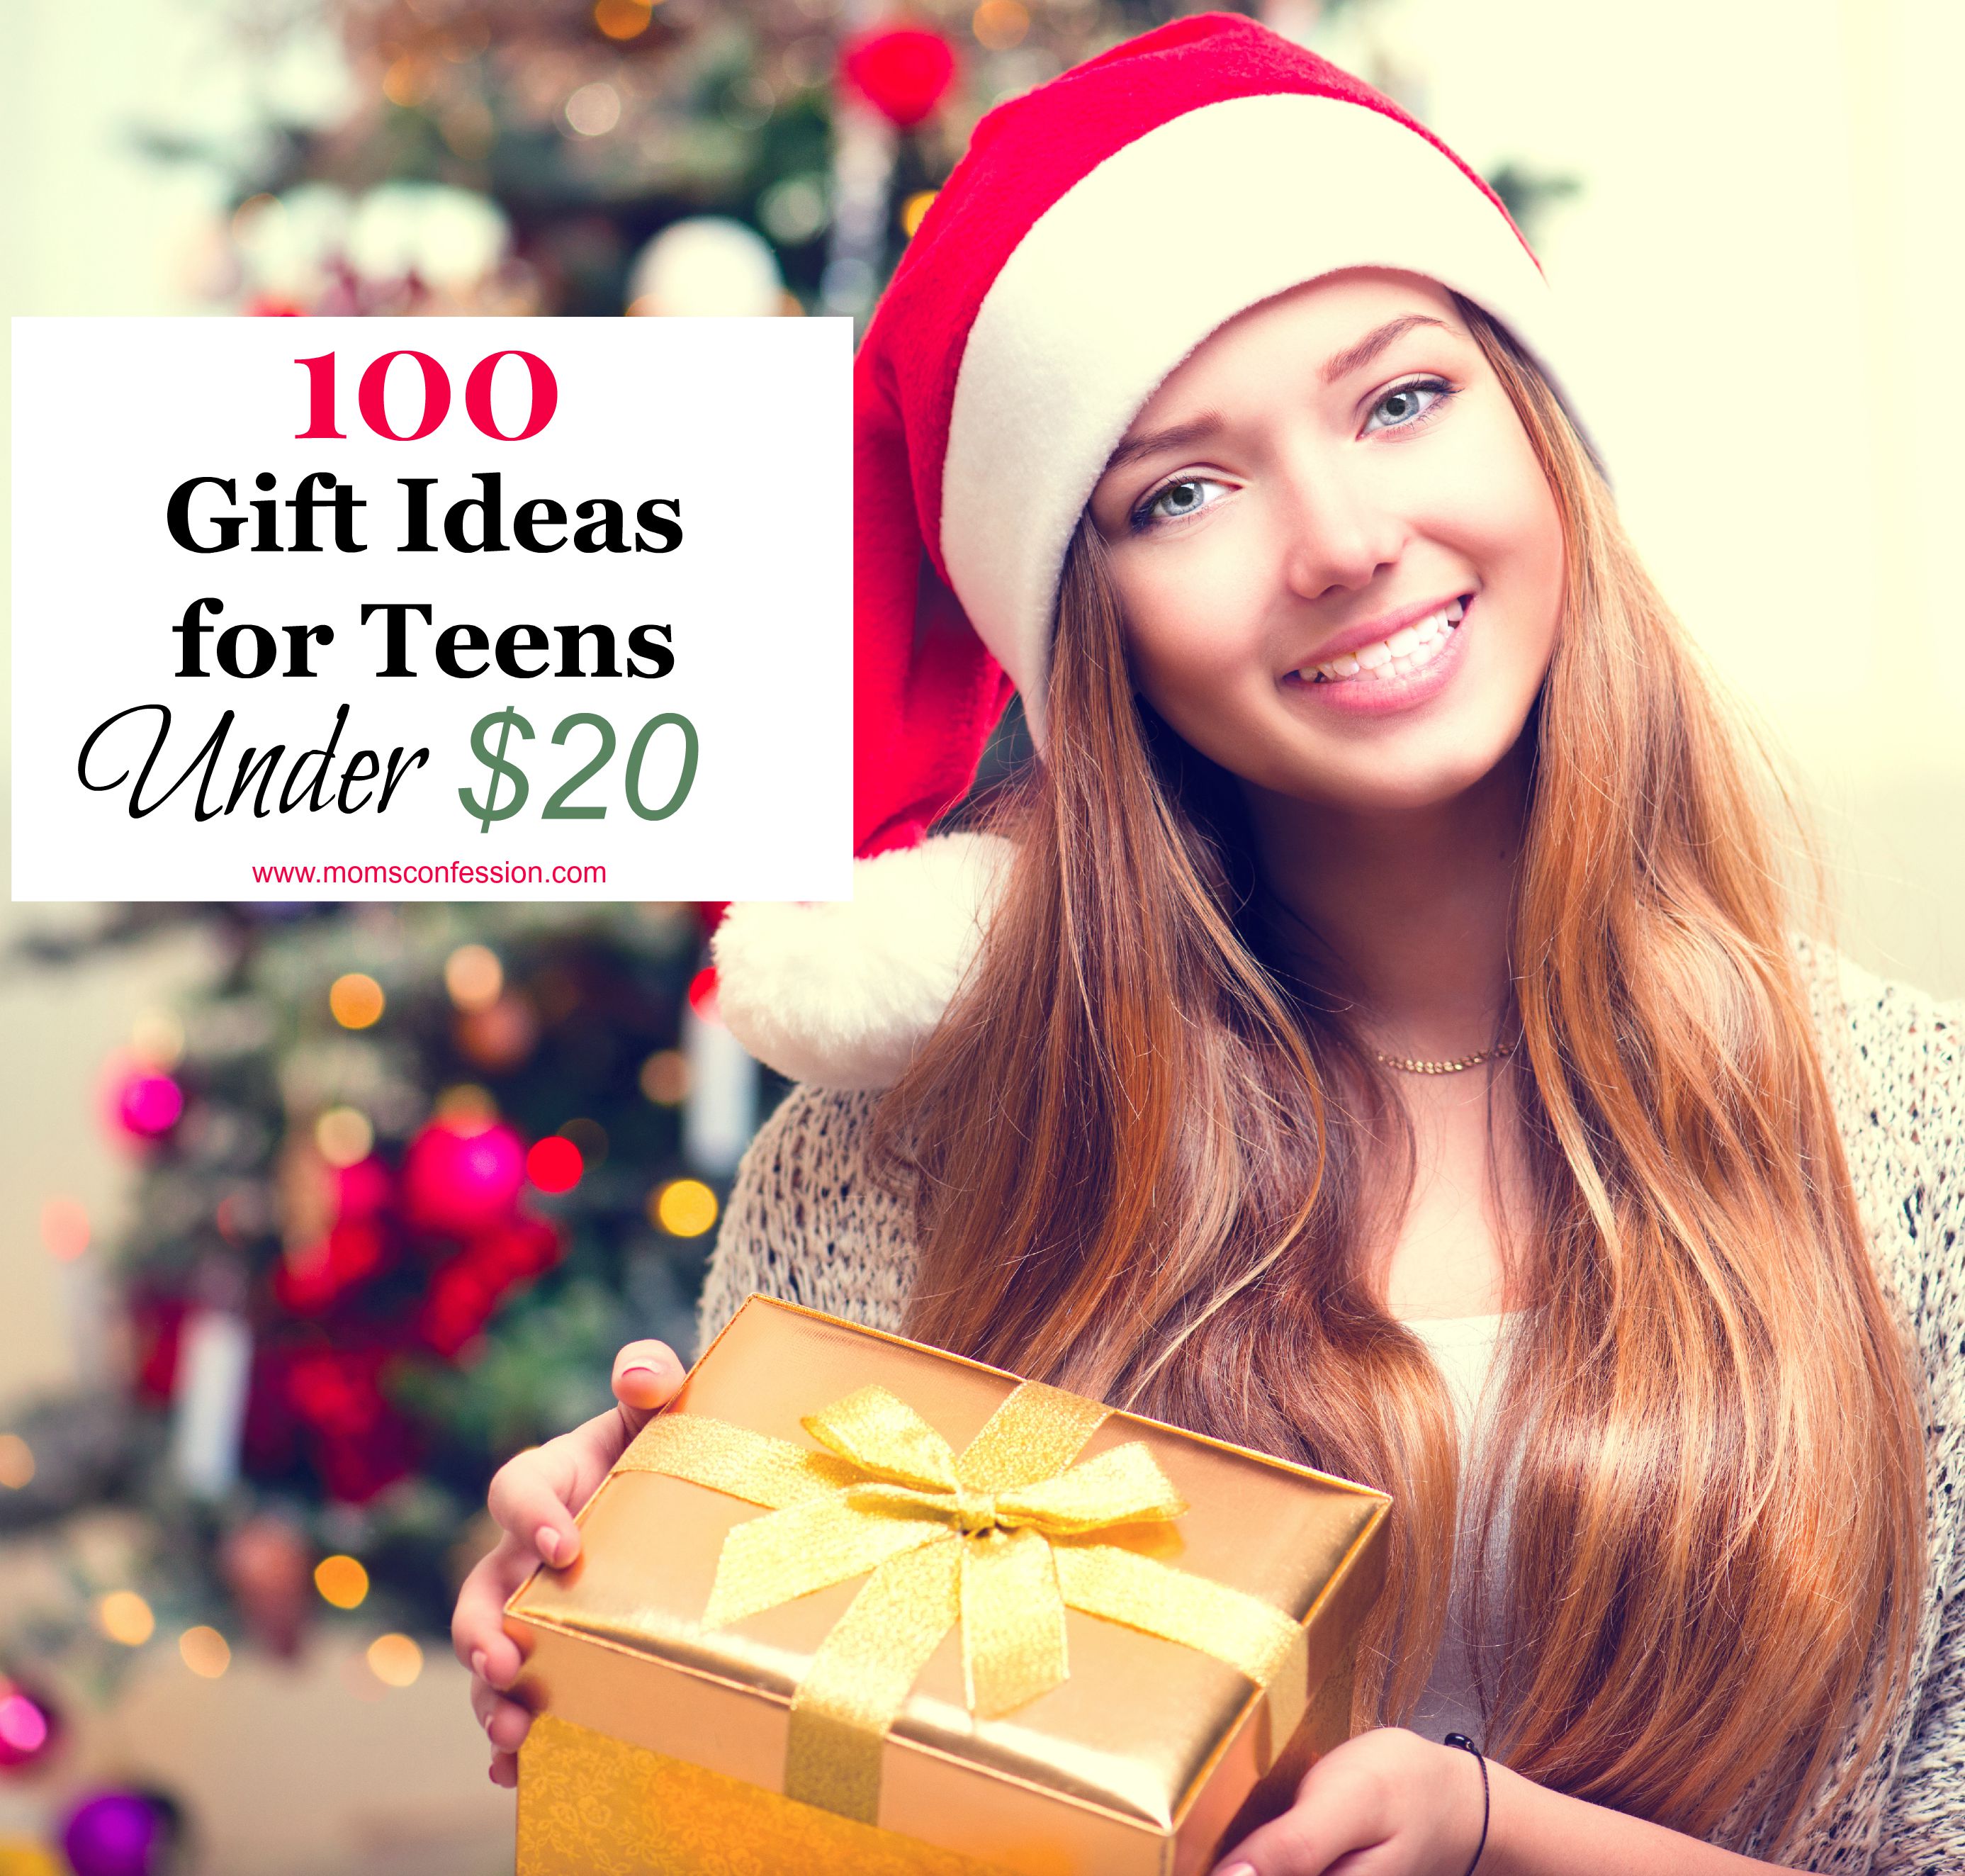 It's time to start shopping and these Gift Ideas for Teens Under $20 are perfect for every budget! Many are even in the $5-$10 range! Check out the list!